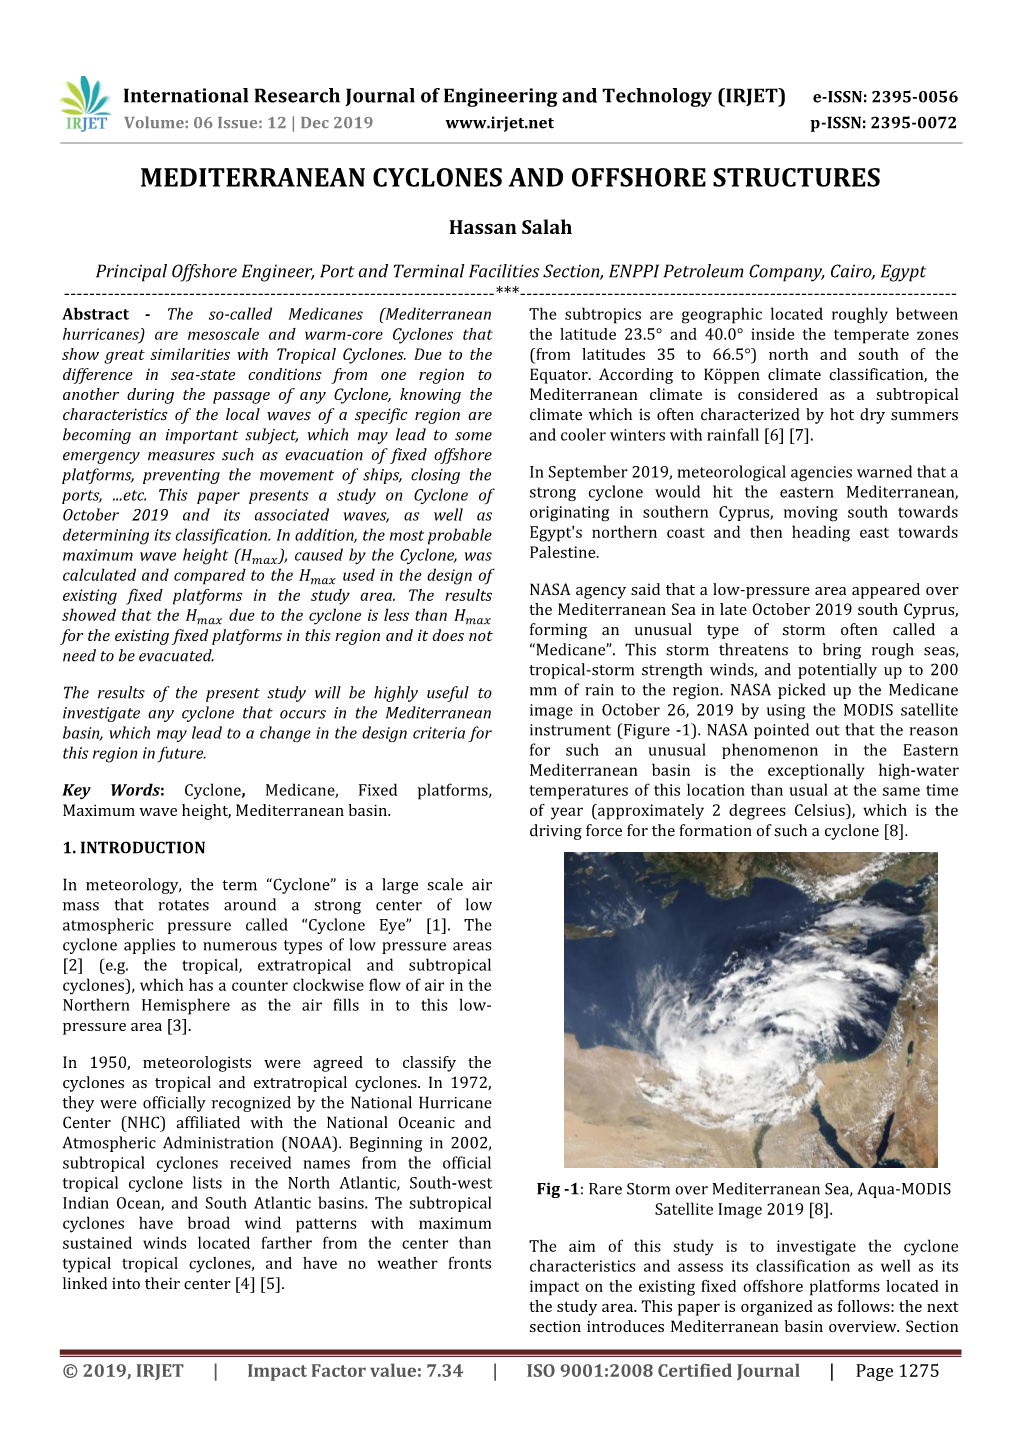 Mediterranean Cyclones and Offshore Structures